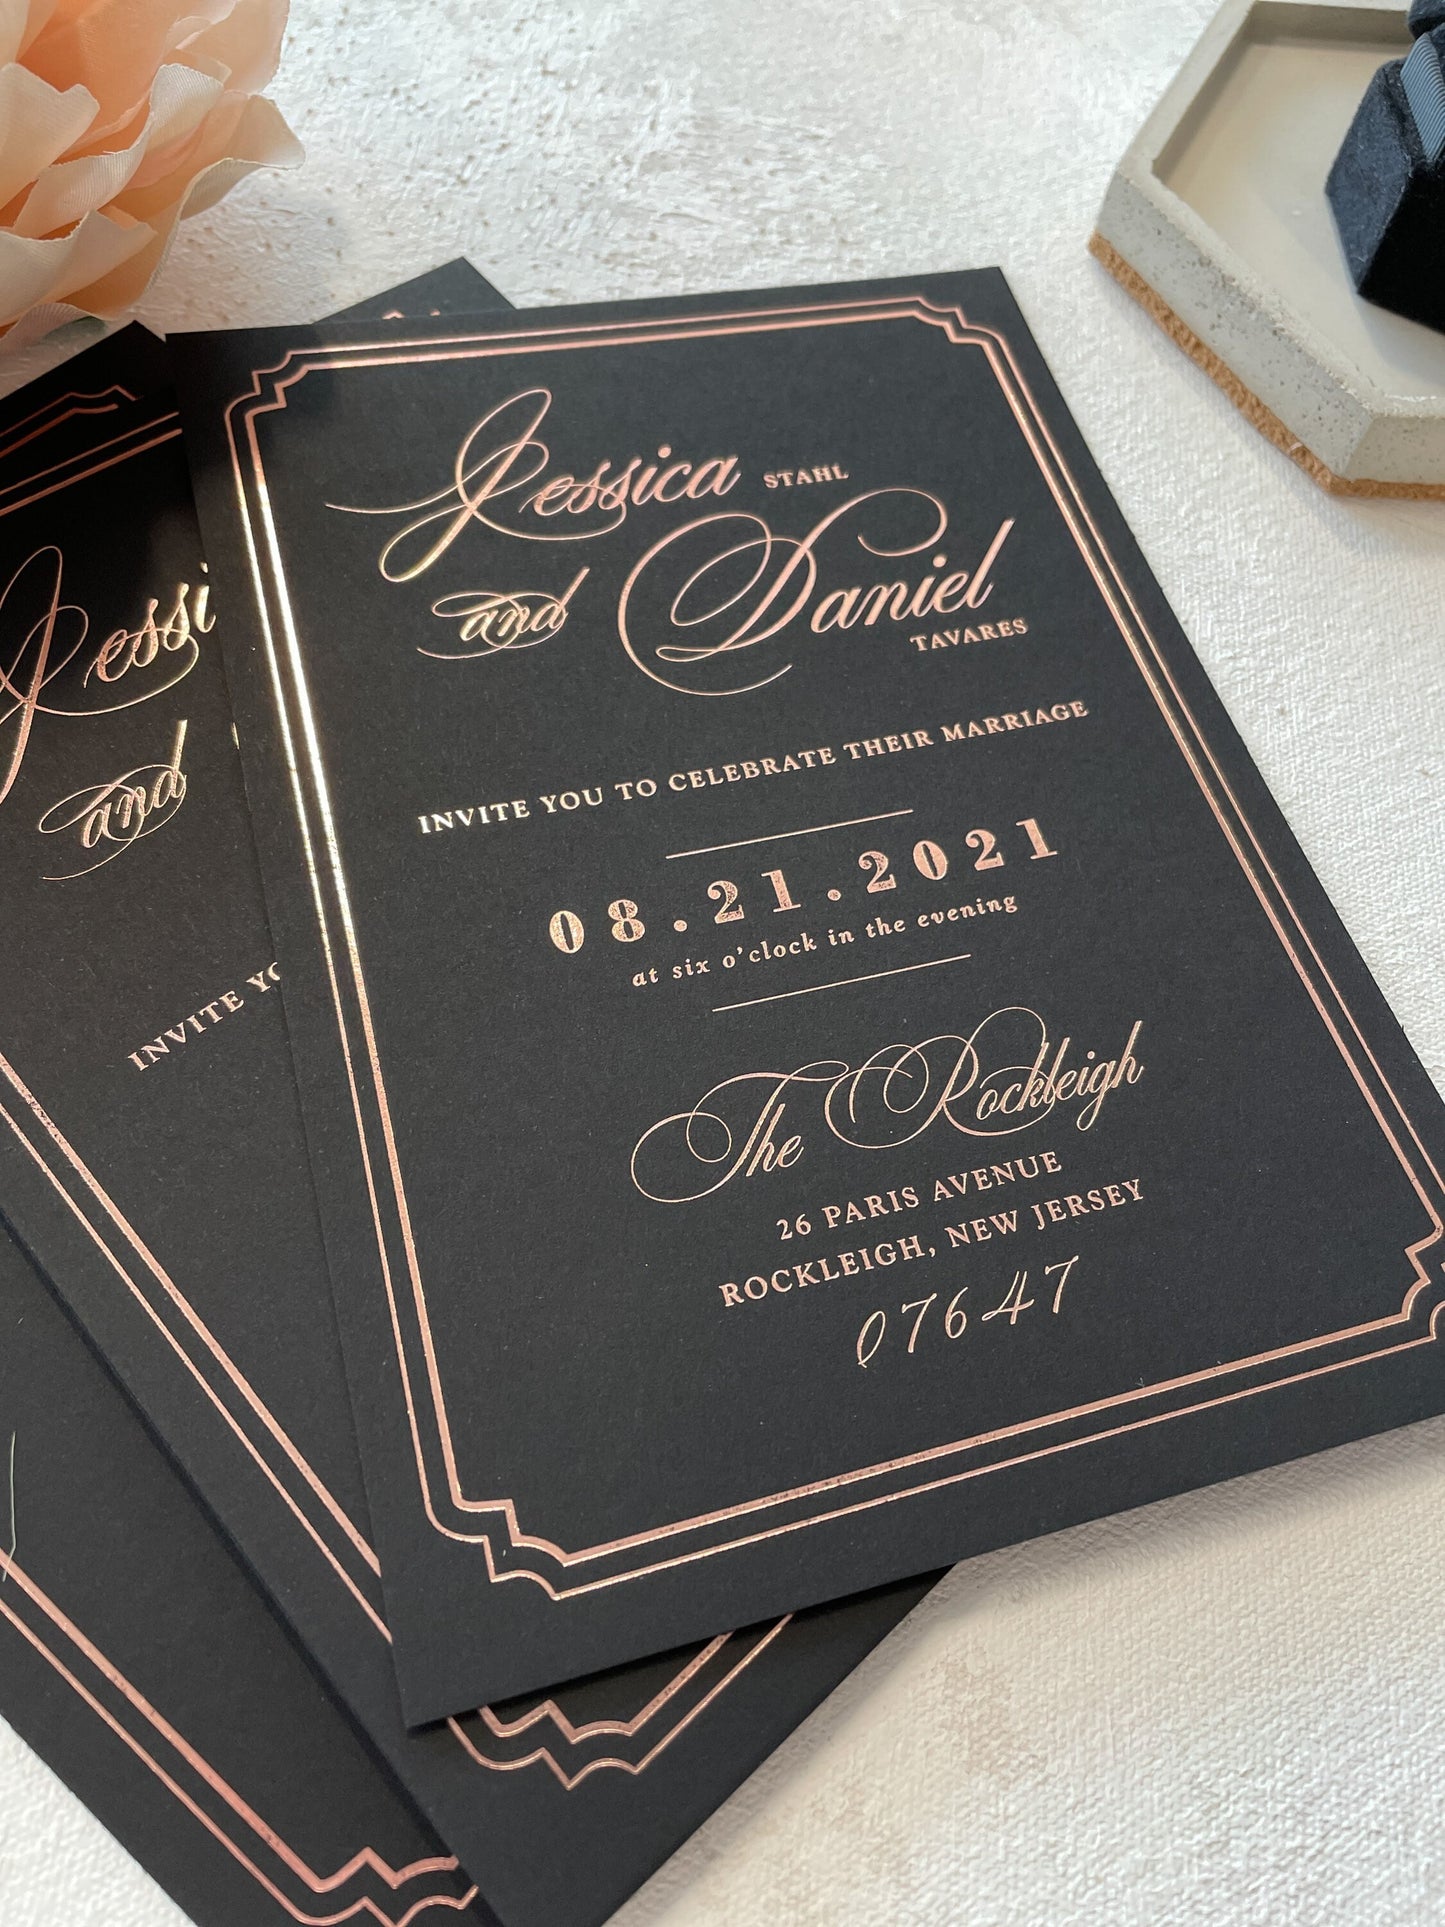 Rose Gold Foil and Black Wedding Invitations 170# Cardstock - Style 147